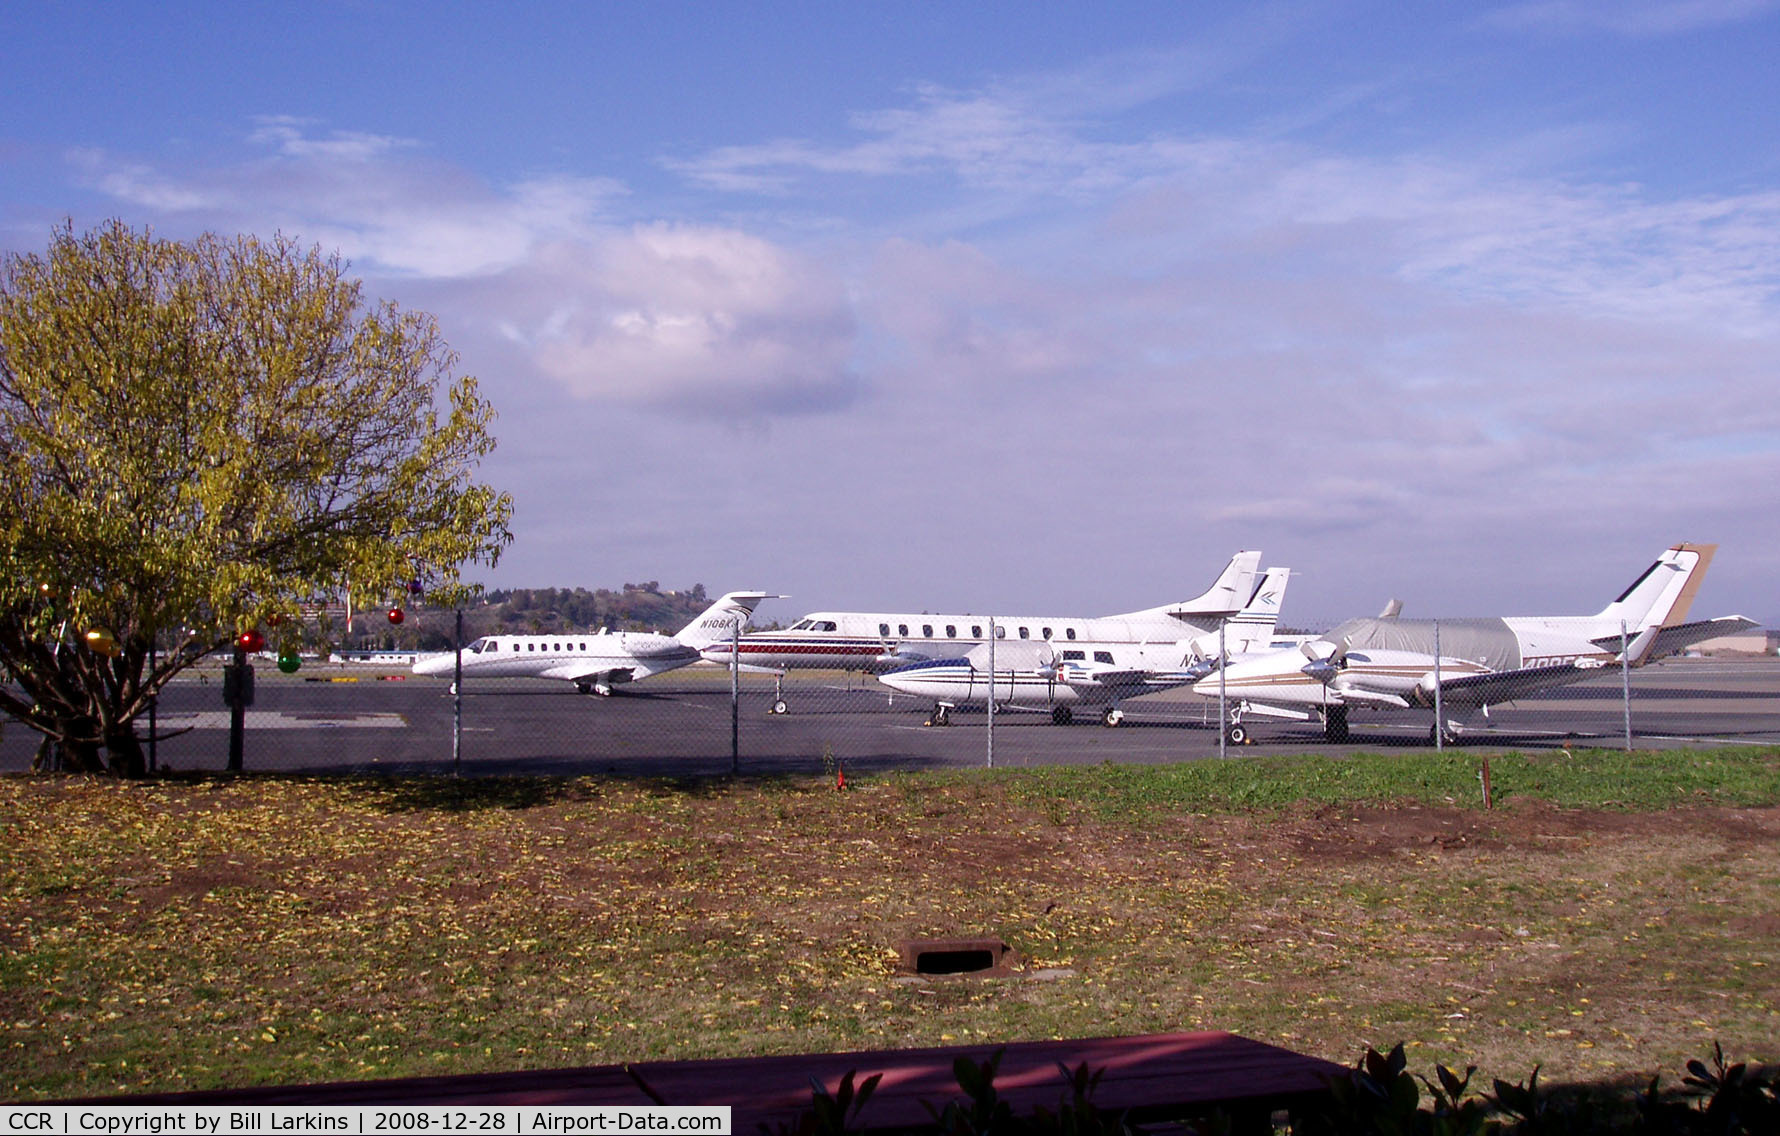 Buchanan Field Airport (CCR) - Viewlooking West from East side of field.